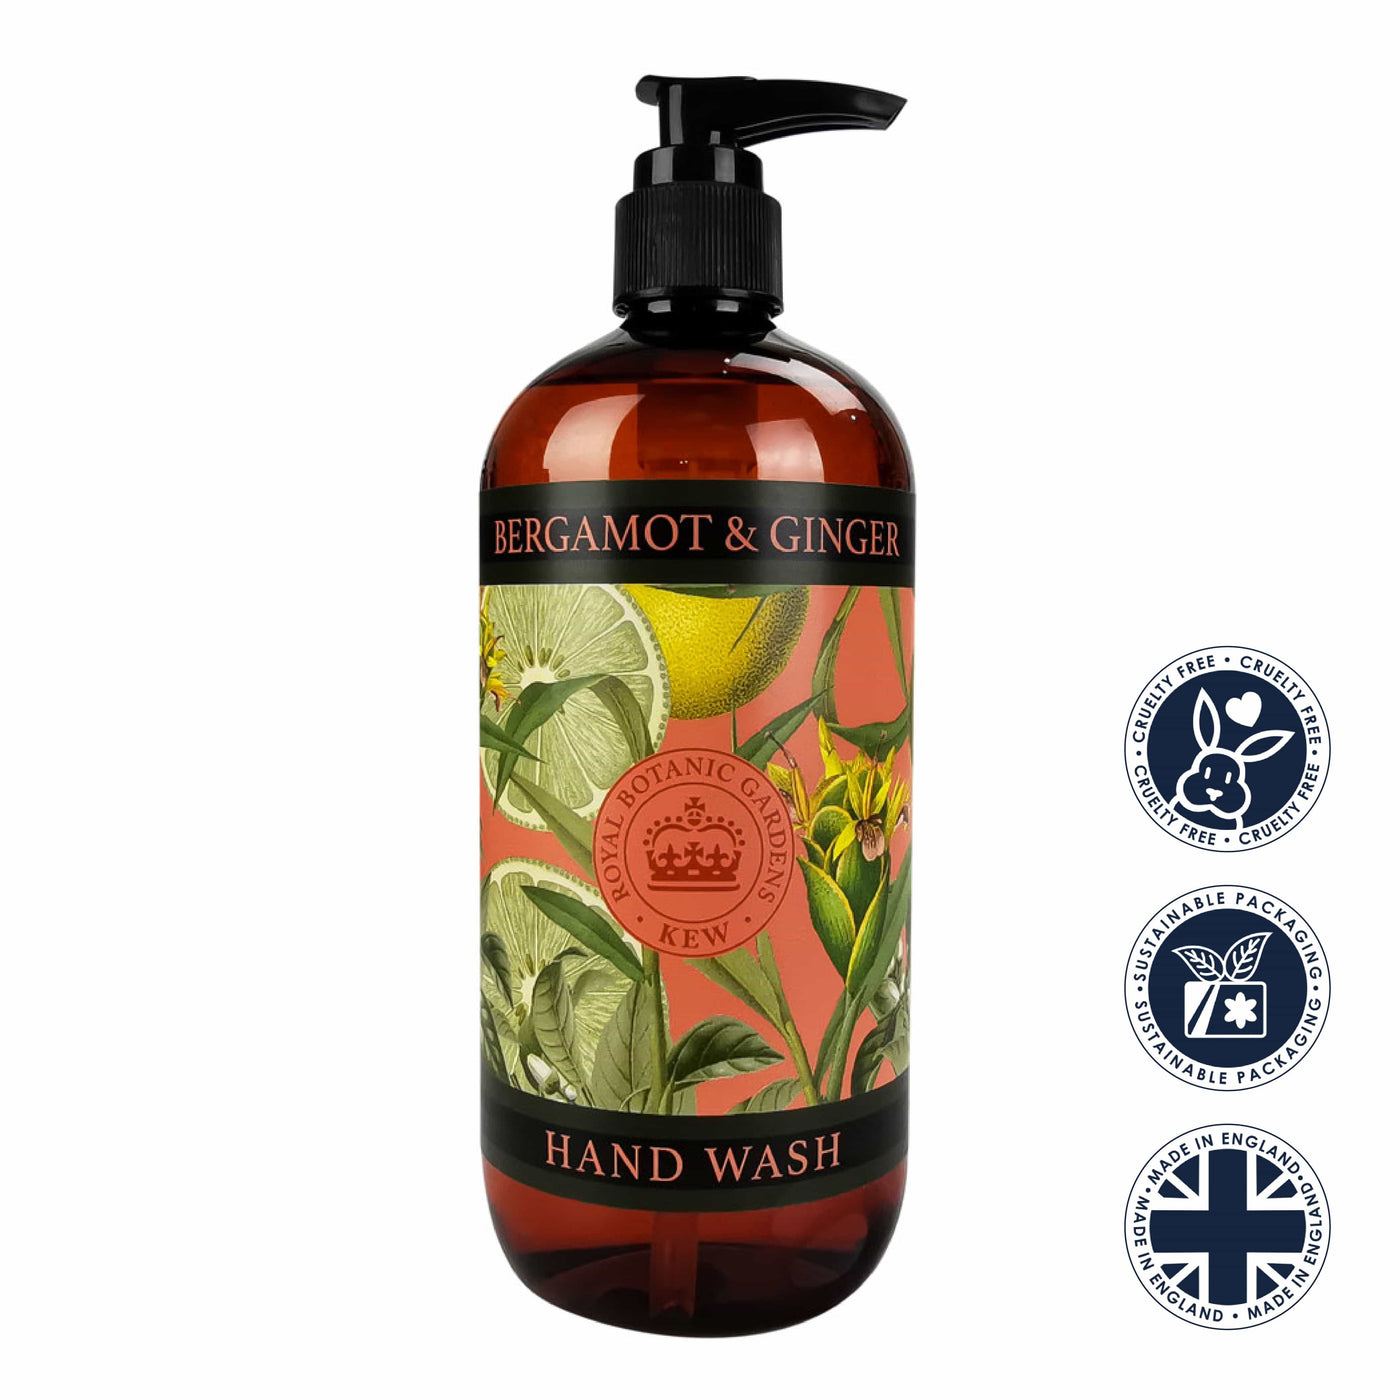 Bergamot & Ginger Hand Wash - Kew Gardens Collection from our Liquid Hand & Body Soap collection by The English Soap Company